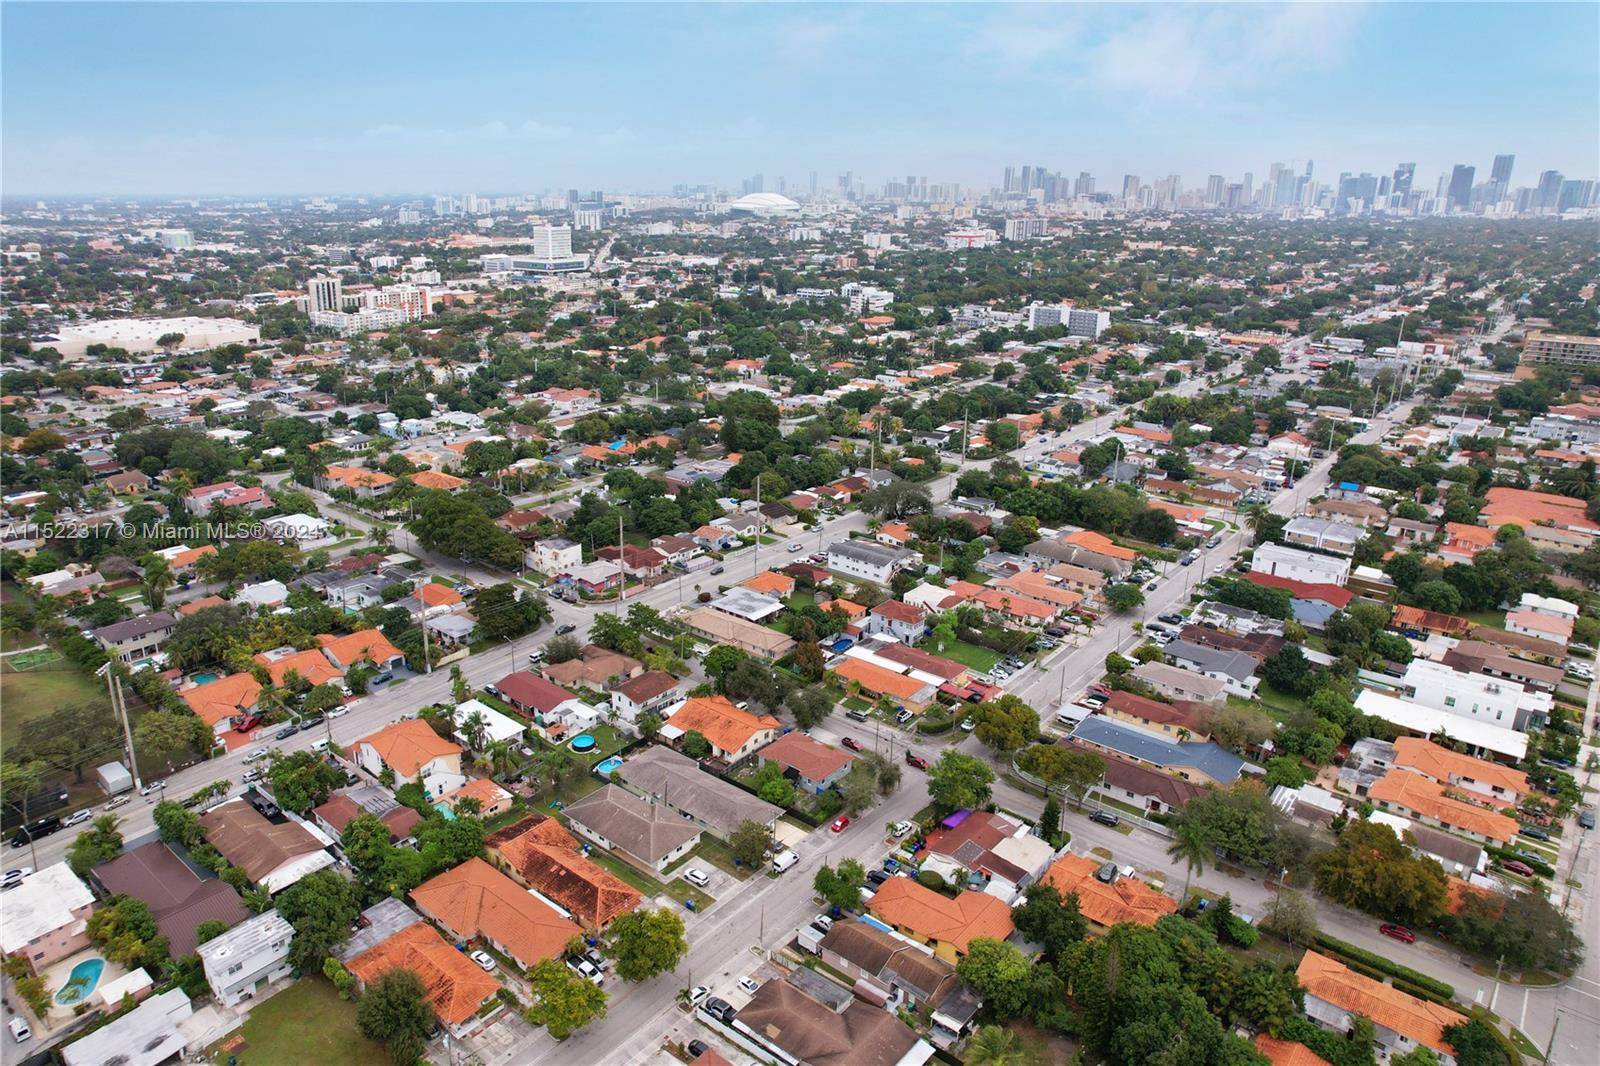 ACCORDING TO COUNTY RECORD Primary Land Use 0802 MULTIFAMILY 2 9 UNITS 2 LIVING UNITS EXCELLENT LOCATION CORAL GABLES SCHOOLS NEAR CORAL WAY NO HOA !